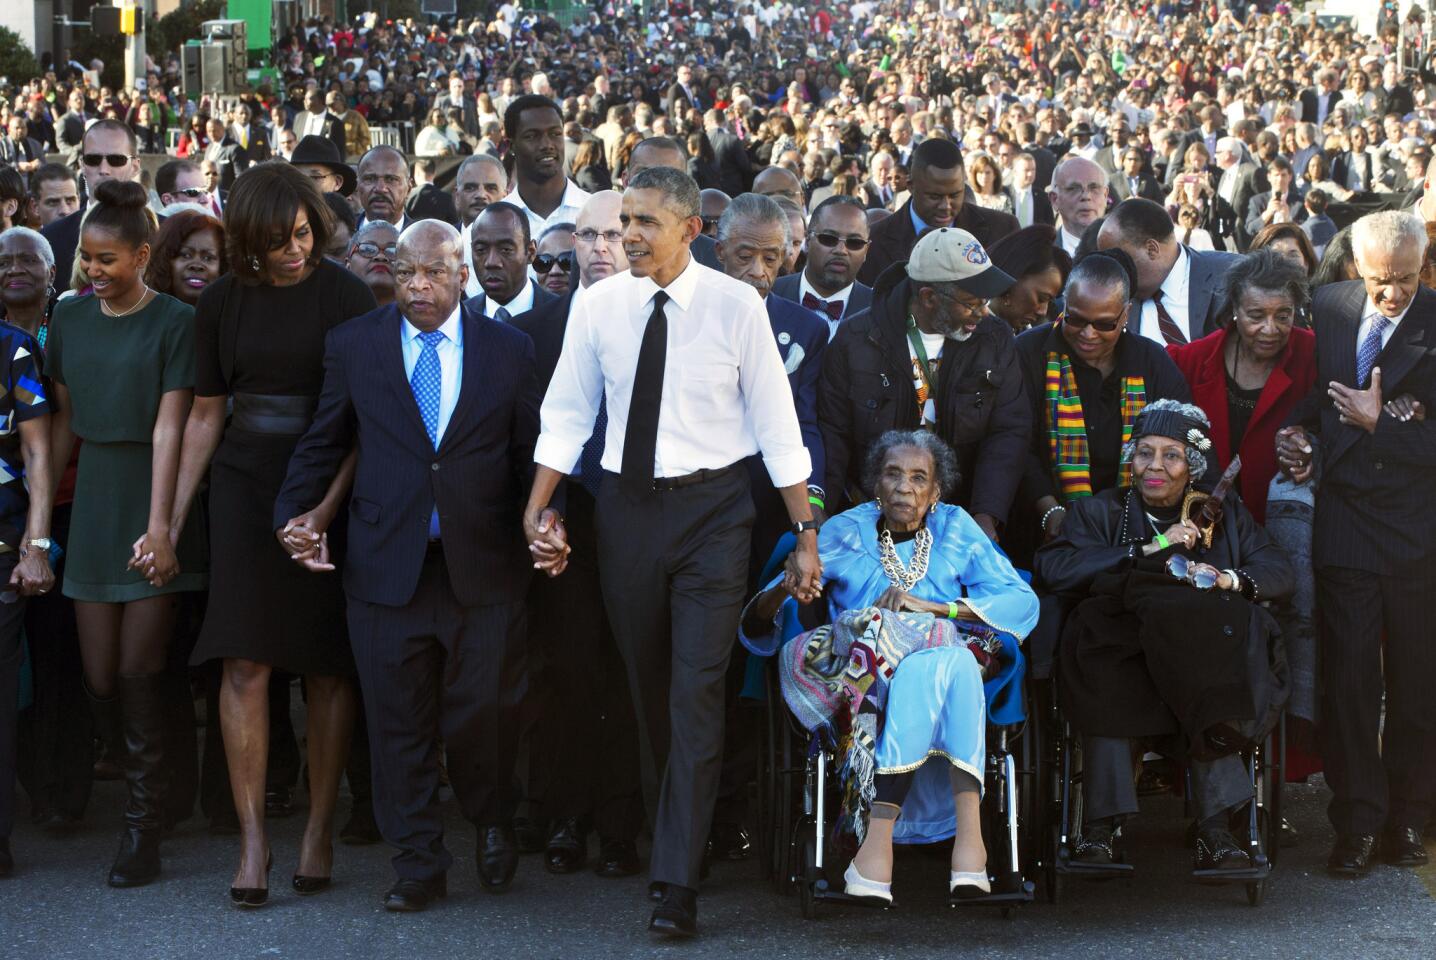 John Lewis holds hands with President Obama and other activists leading a 50th anniversary march in Selma, Alabama